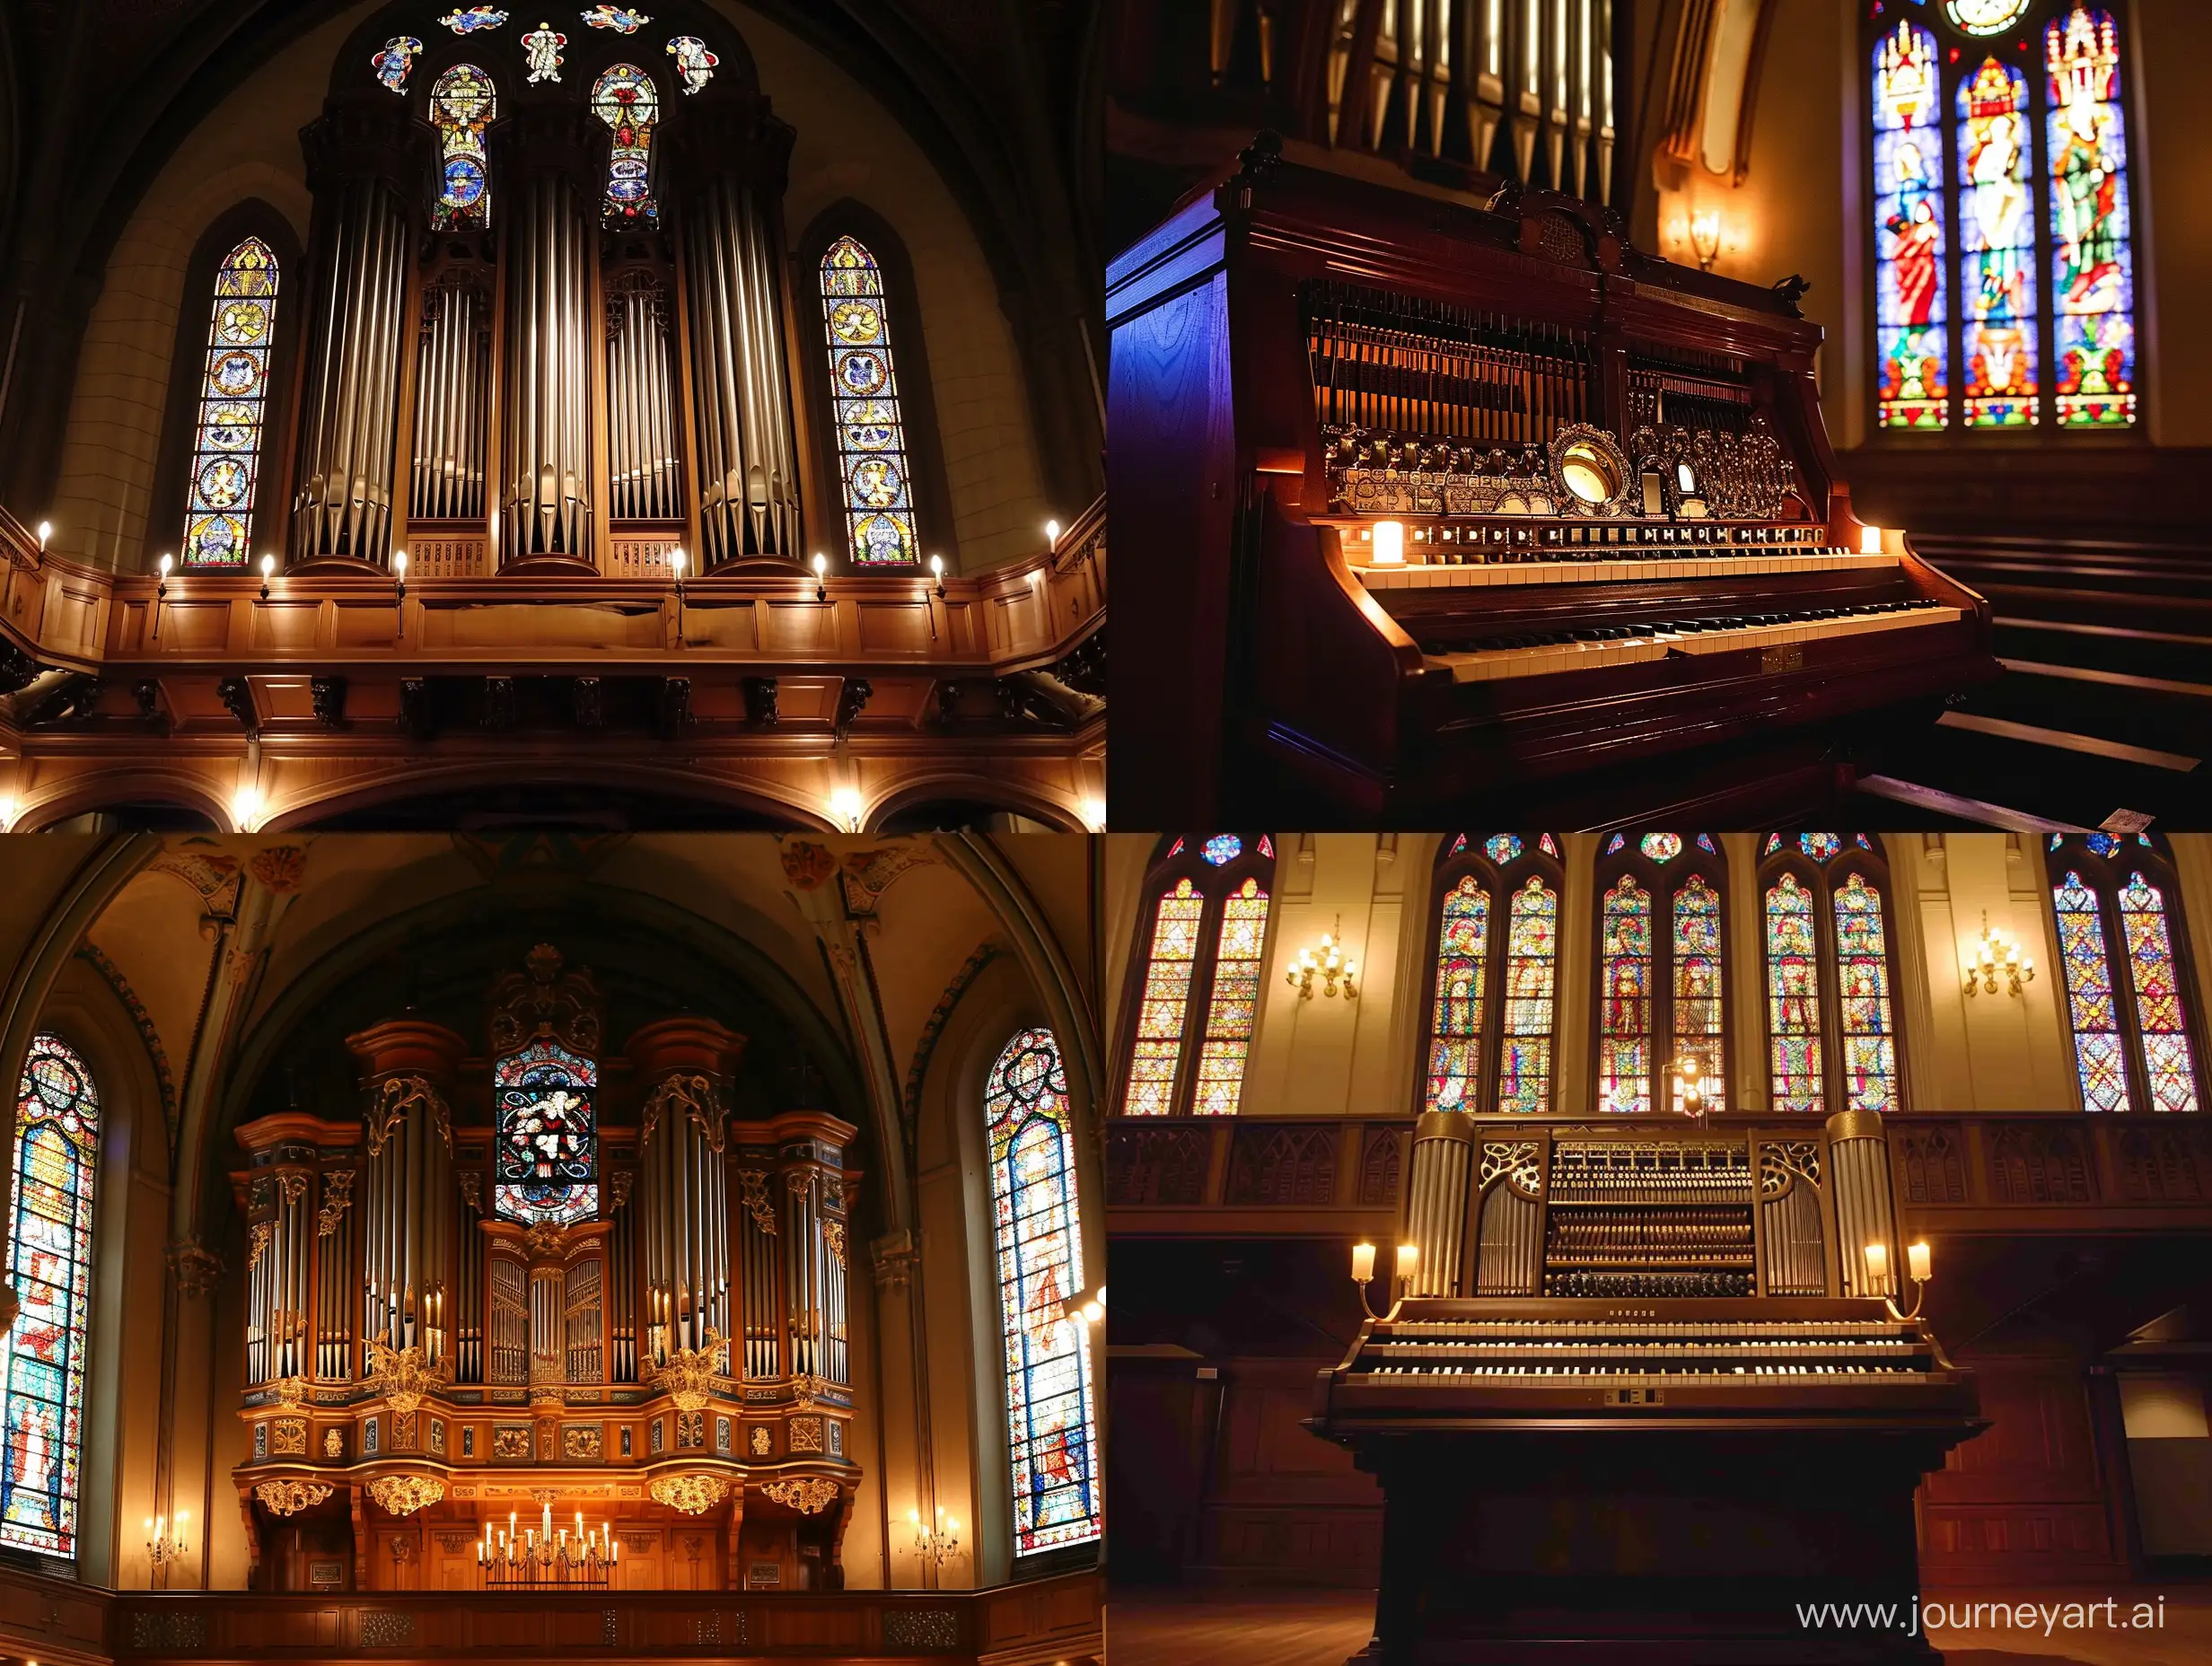 Elegant-Organ-Performance-in-Candlelit-Concert-Hall-with-Stained-Glass-Windows